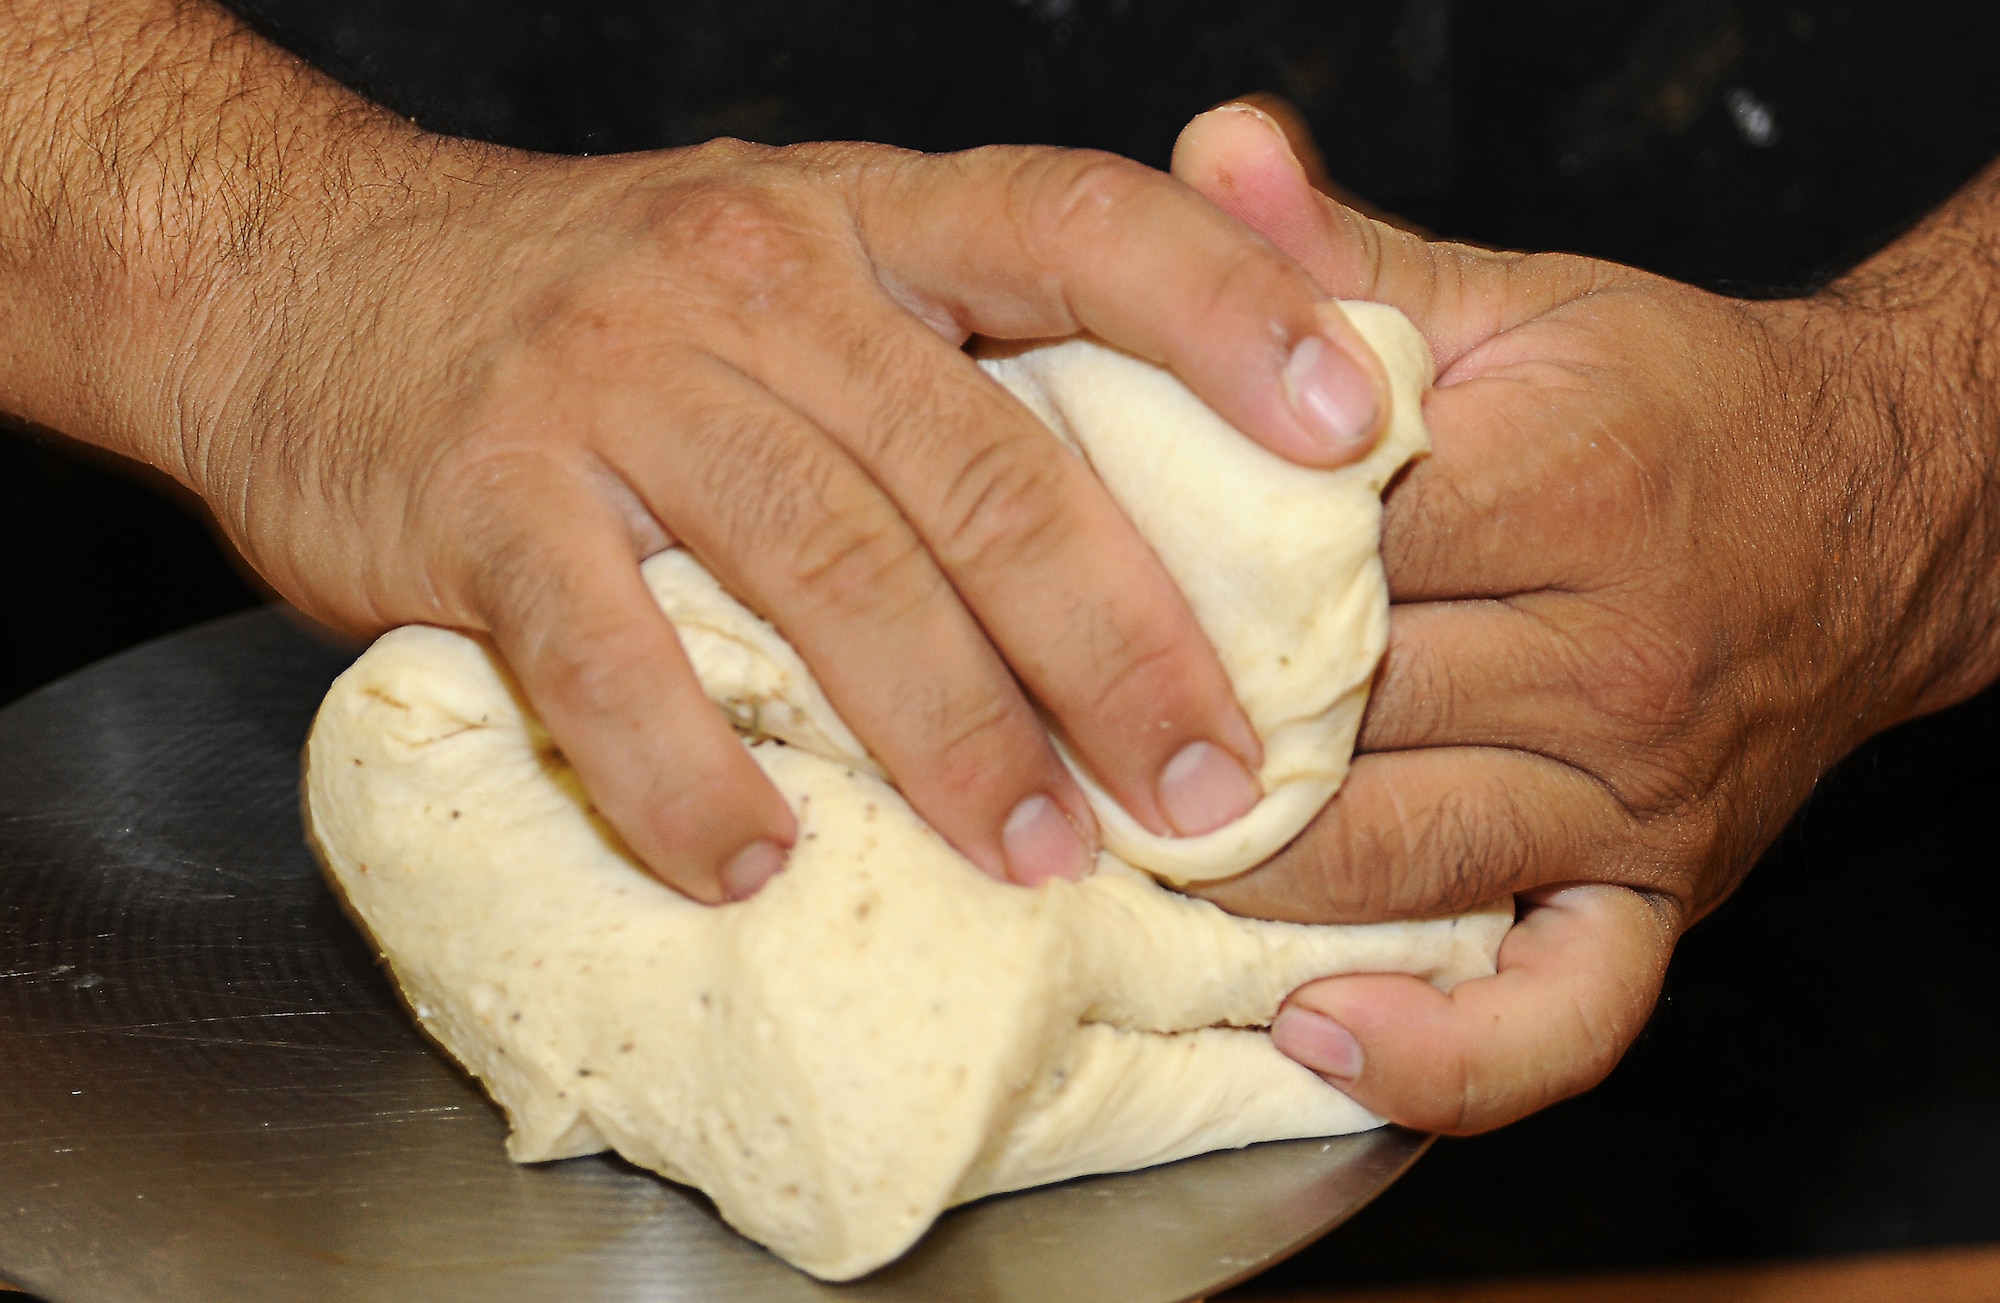 Baker Jessie Torres kneads dough to make bread loafs, Oct. 30 at the David Grant Medical Center dining facility. (U.S. Air Force photo/ Staff Sgt. Liliana Moreno)